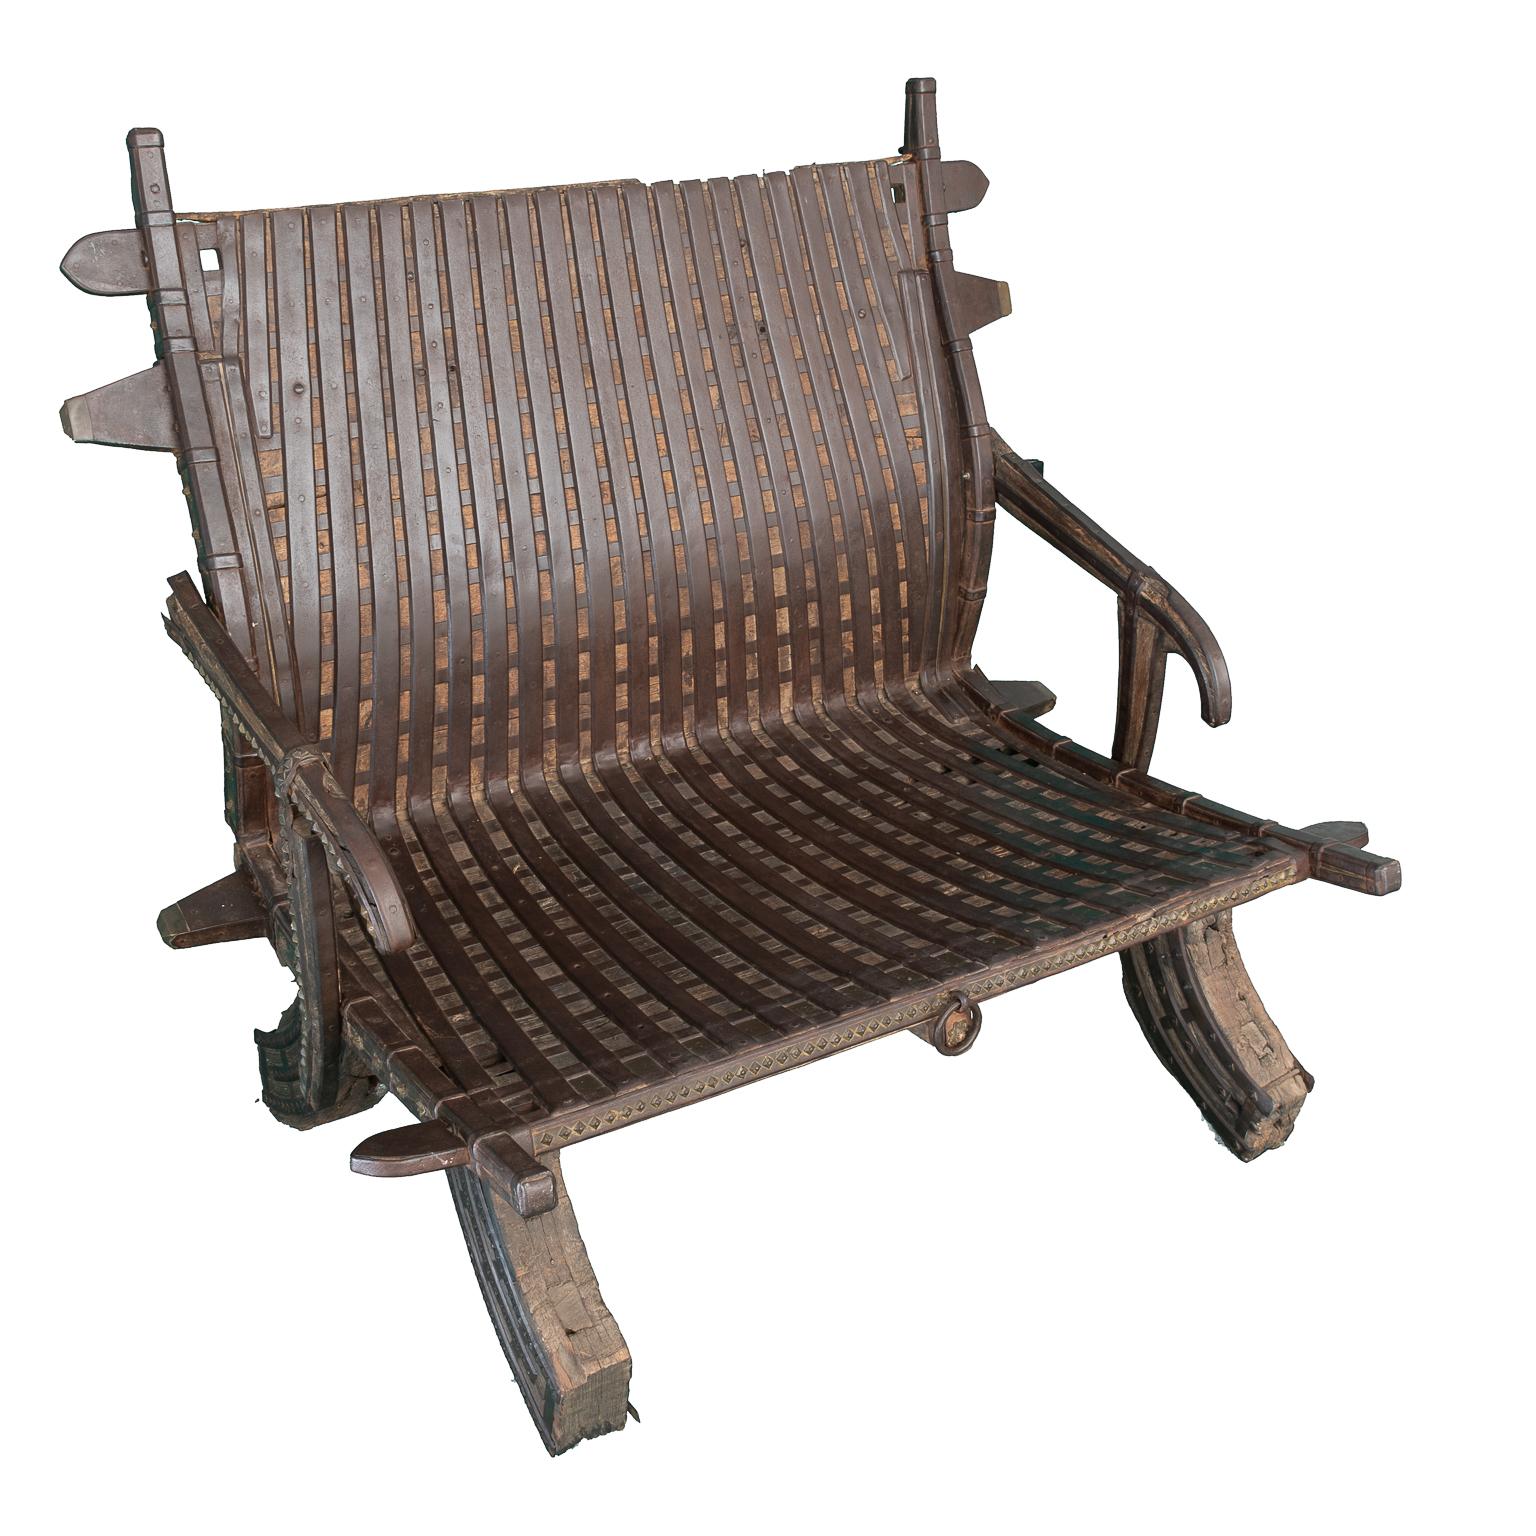 hindu chair, old of the beginning of the 18th century, made of wood with wrought iron, it has wear and deterioration due to antiquity.